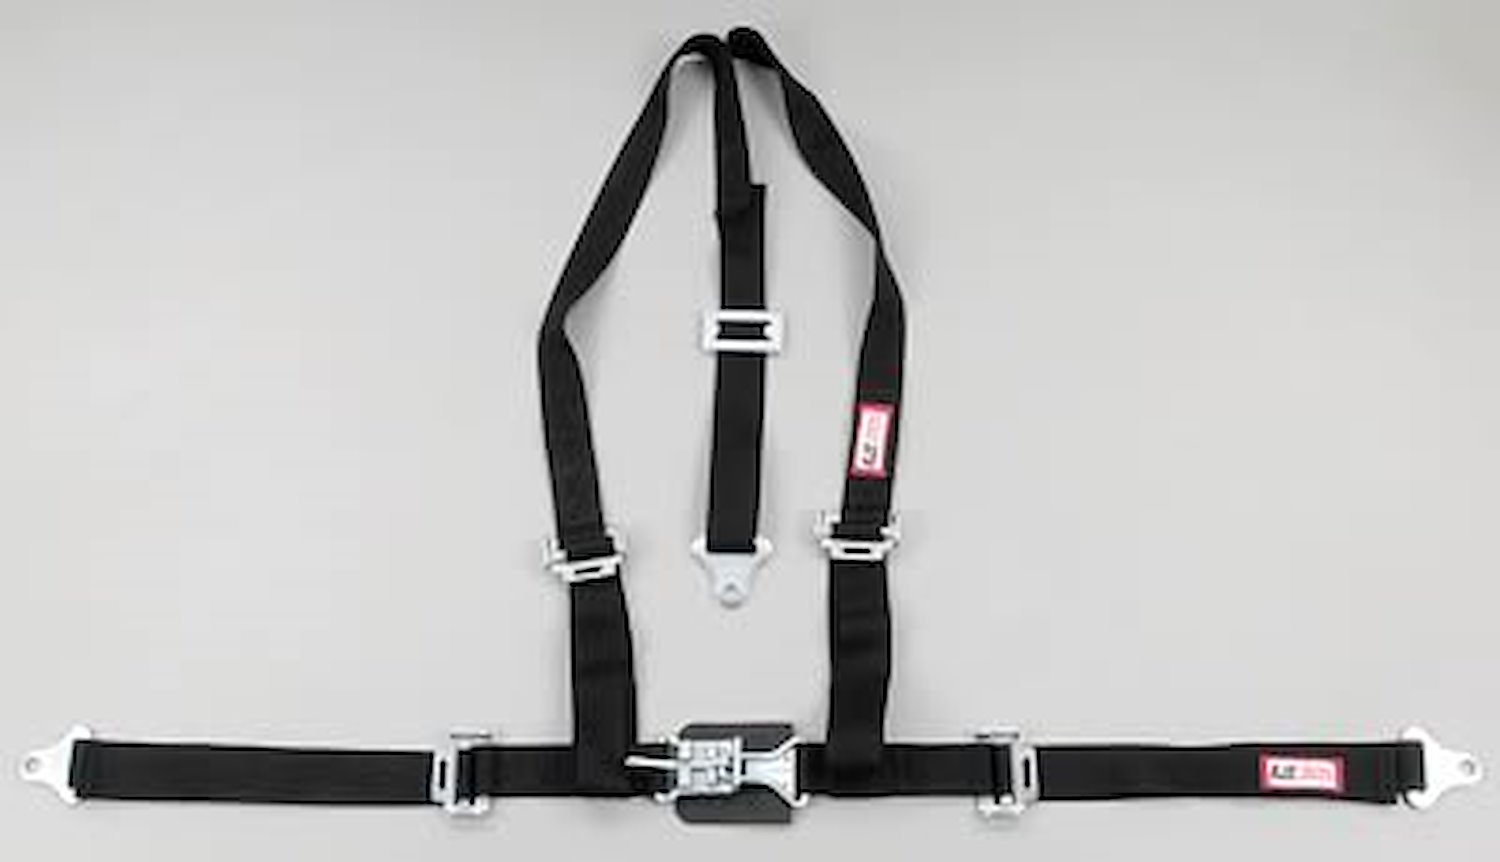 NON-SFI L&L HARNESS 2 PULL DOWN Lap Belt w/adjuster 2 S.H. V ROLL BAR MOUNT w/STERNUM STRAP ALL SNAP ENDS RED